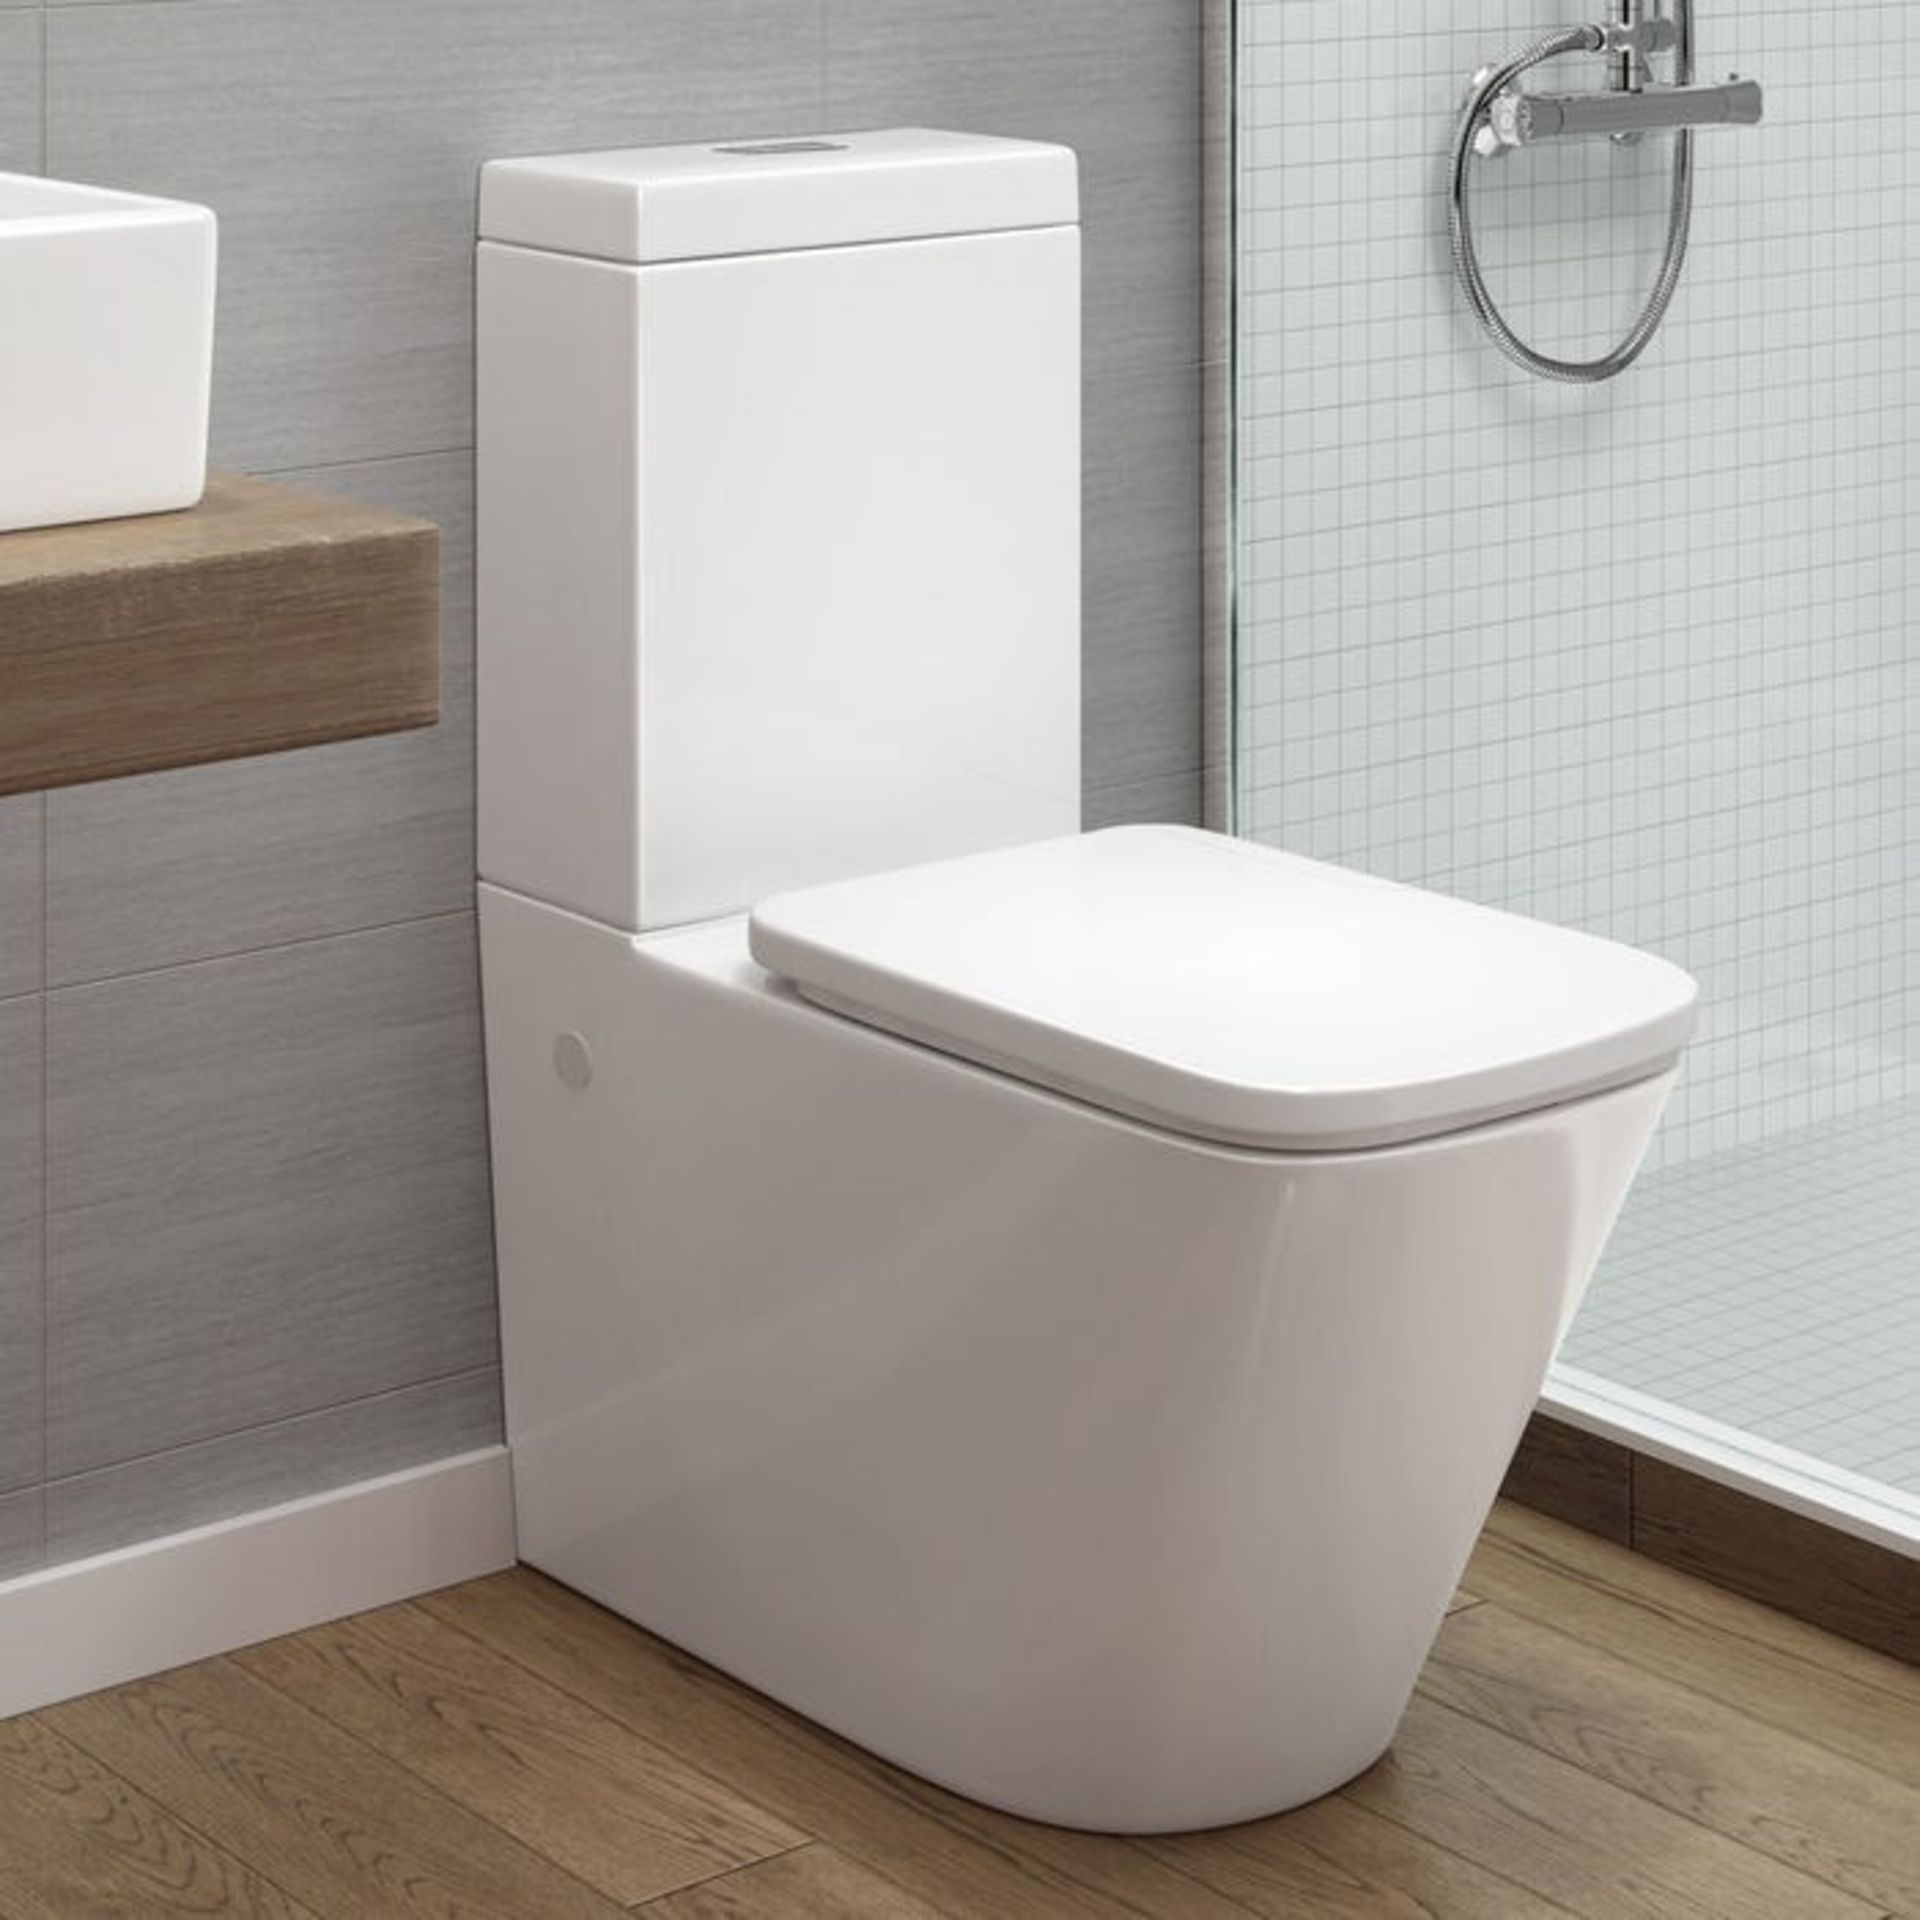 Florence Close Coupled Toilet & Cistern inc Soft Close Seat. RRP £499.99. 640CCT Contemporary...